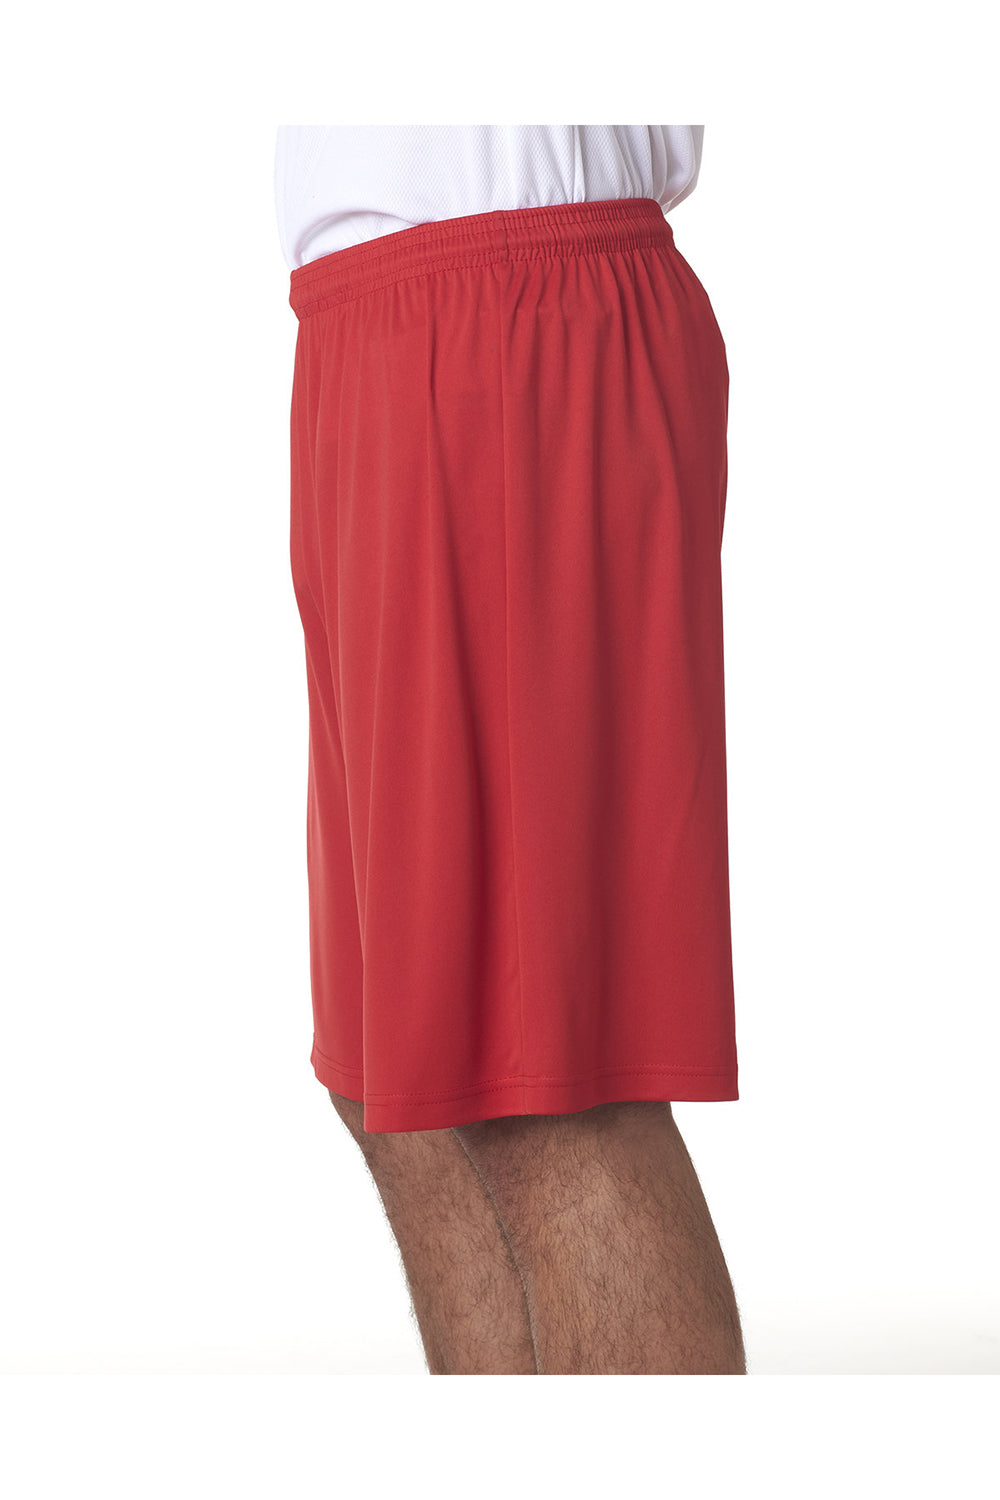 A4 N5283 Mens Moisture Wicking Performance Shorts Scarlet Red Model Side